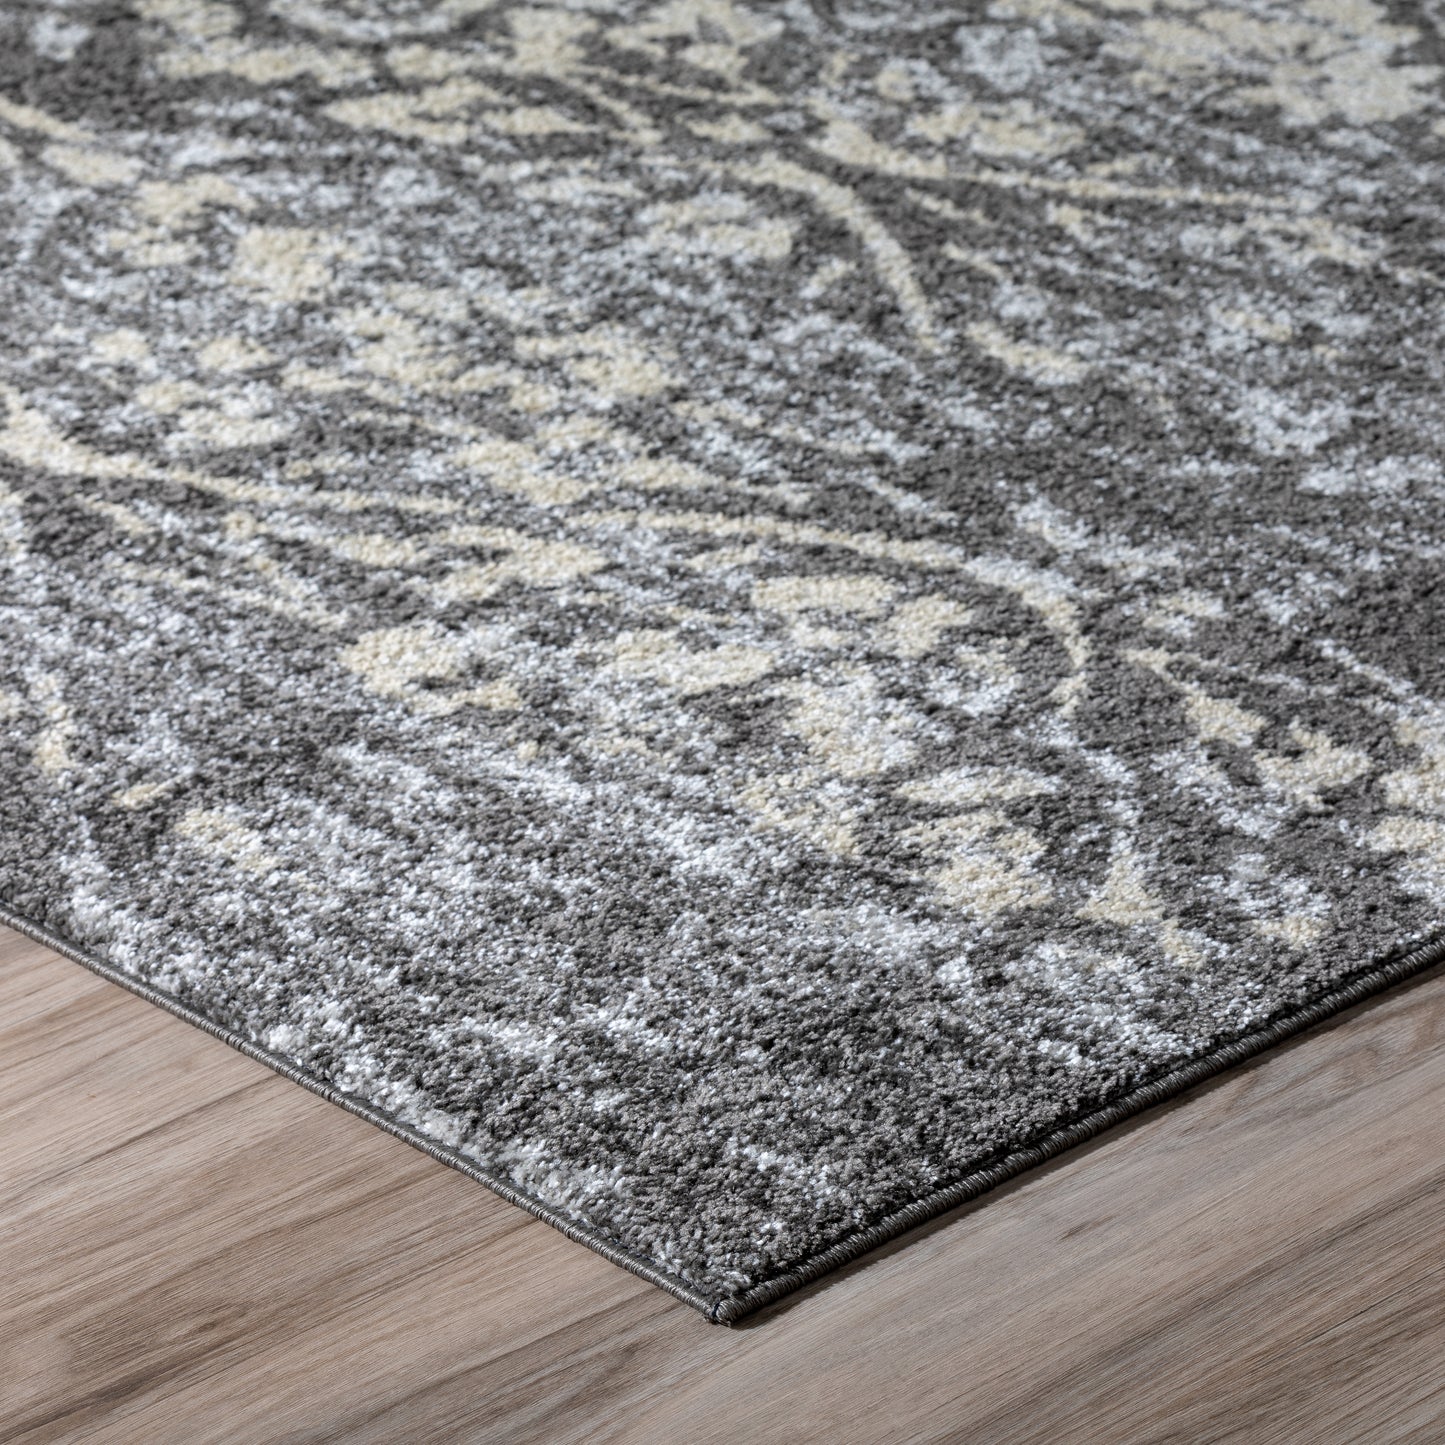 Gala GA3 Power Woven Synthetic Blend Indoor Area Rug by Dalyn Rugs